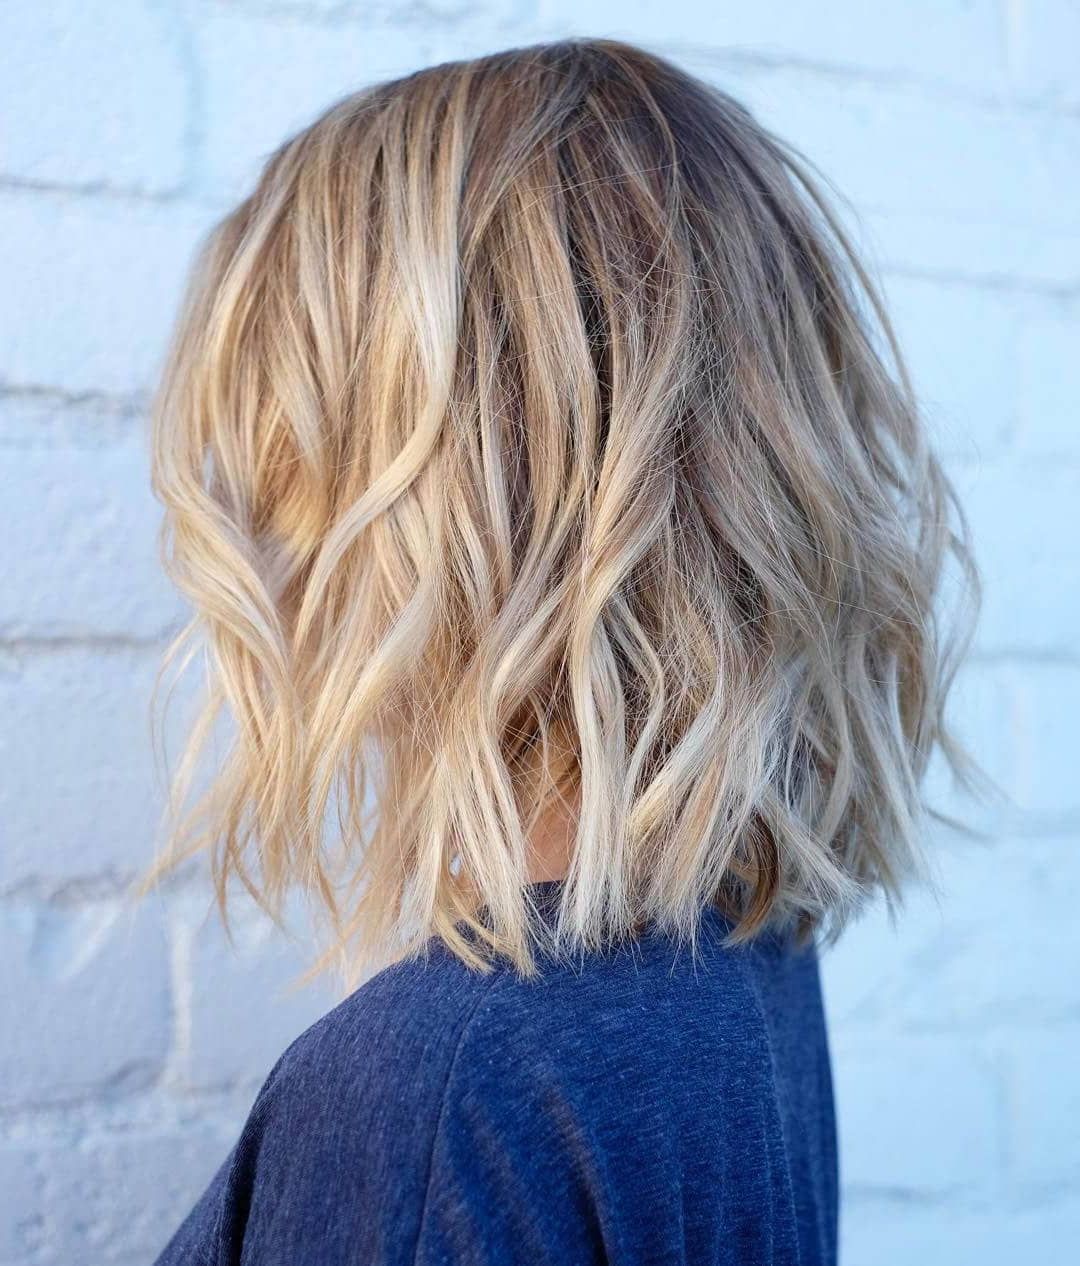 50 Fresh Short Blonde Hair Ideas To Update Your Style In 2018 Within Nape Length Blonde Curly Bob Hairstyles (View 12 of 25)